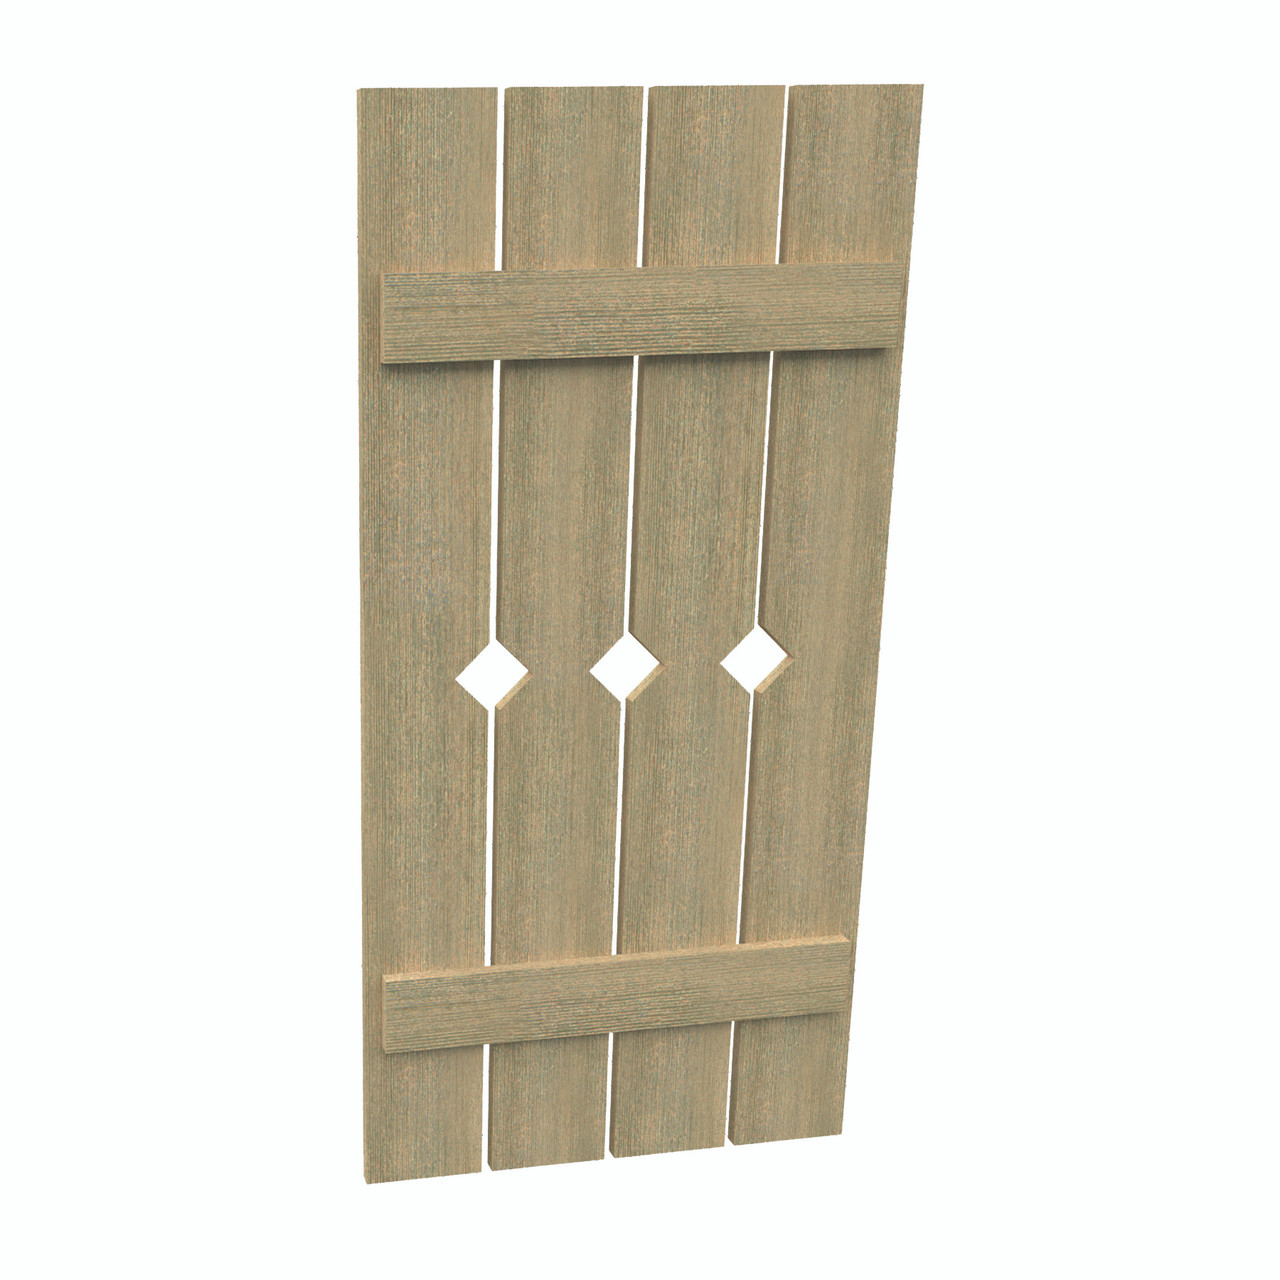 24 inch by 37 inch Plank Shutter with 4-Plank, Diamond